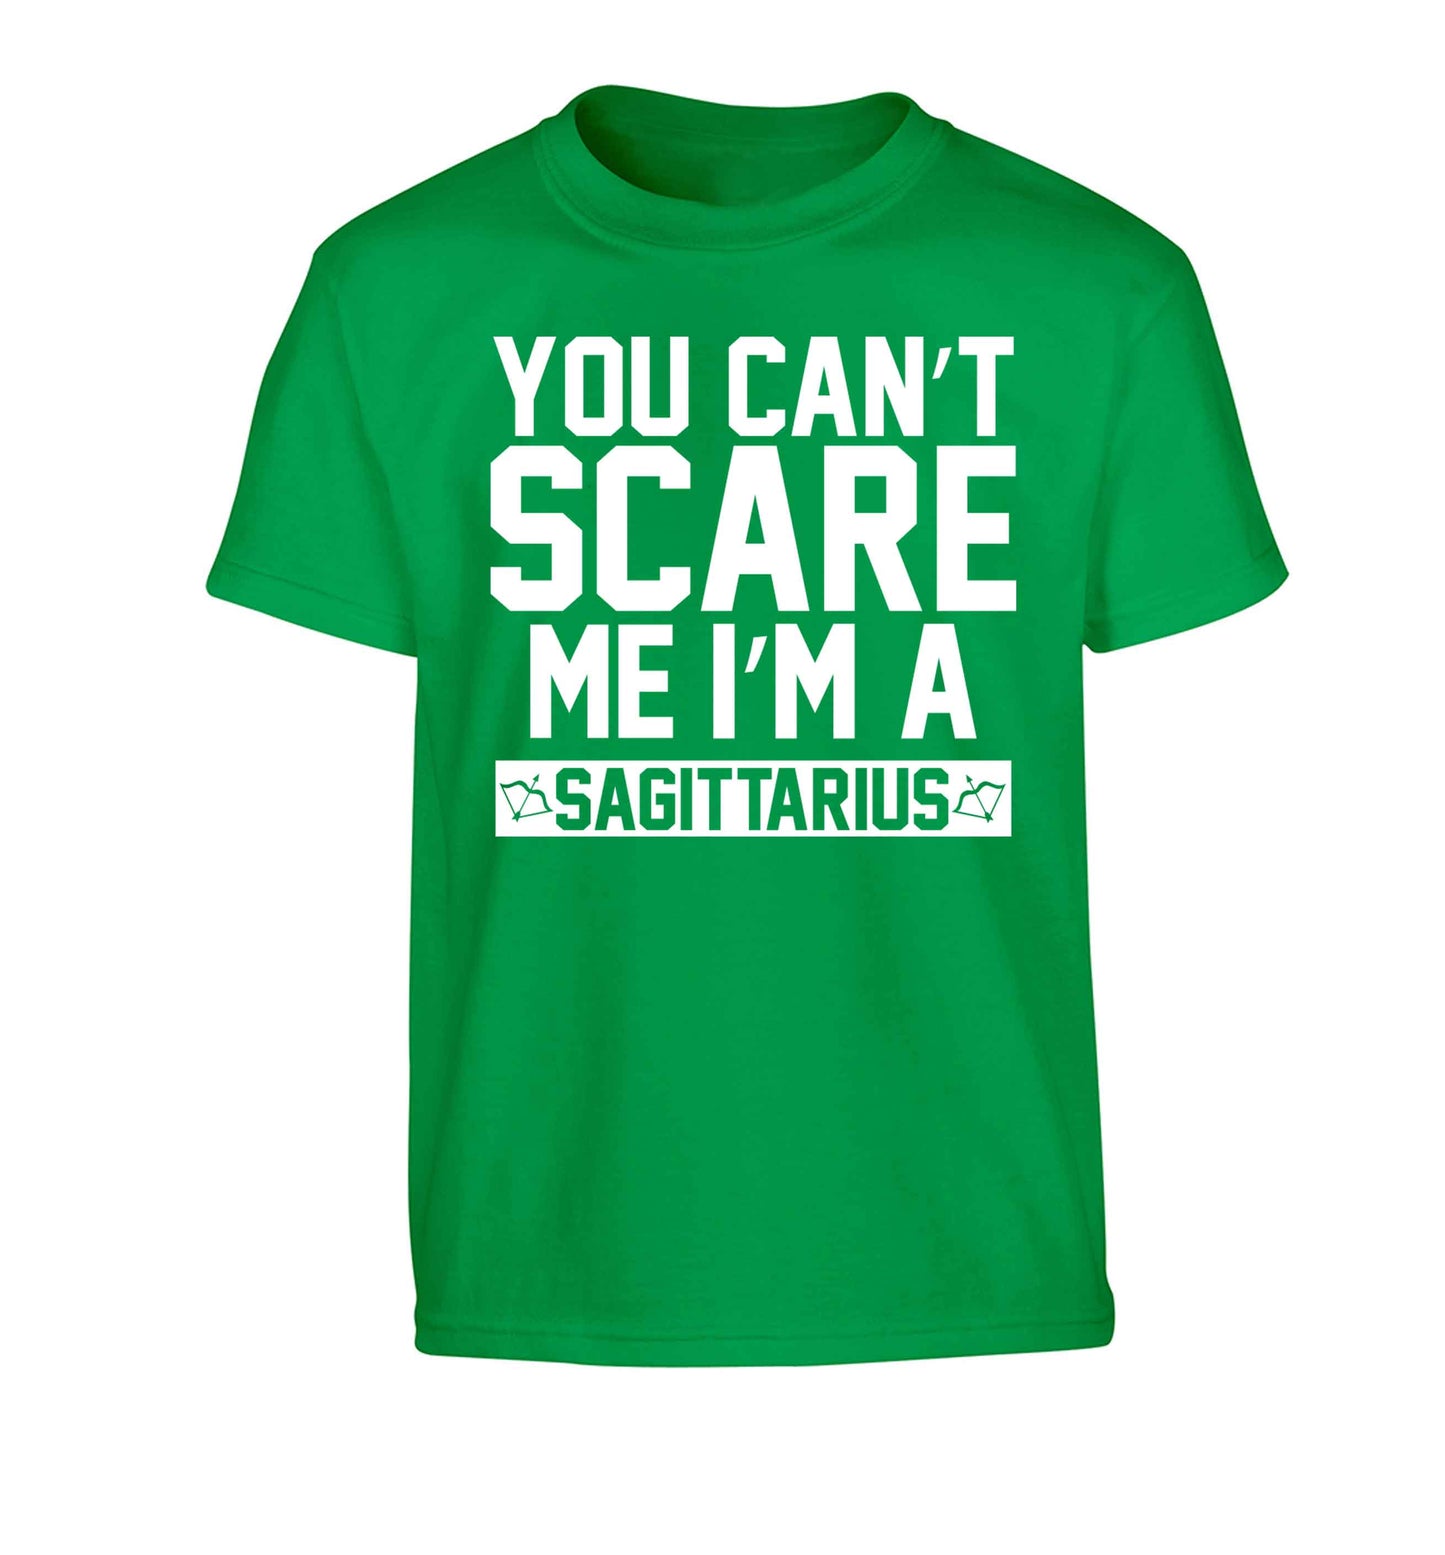 You can't scare me I'm a sagittarius Children's green Tshirt 12-13 Years